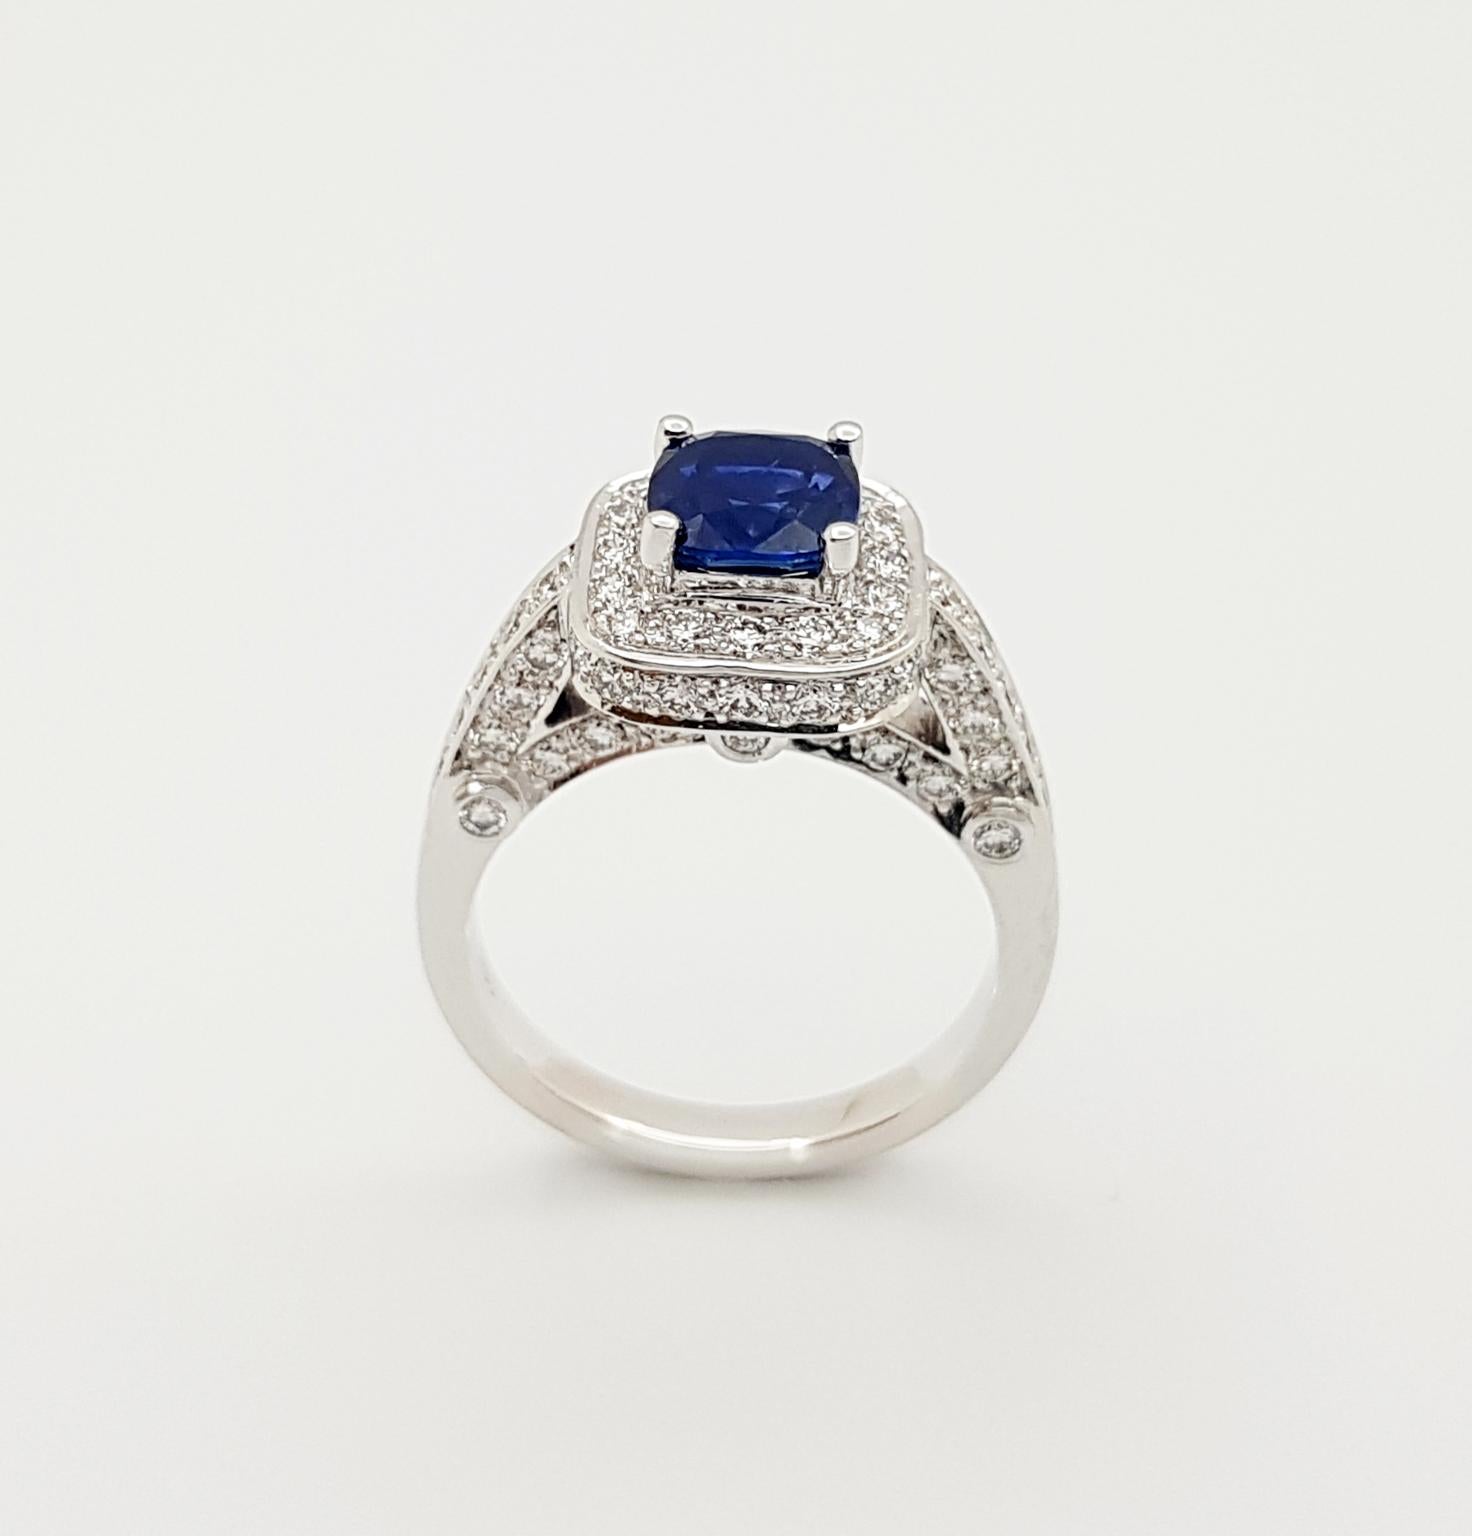 Certified Blue Sapphire with Diamond Ring Set in 18 Karat White Gold For Sale 2